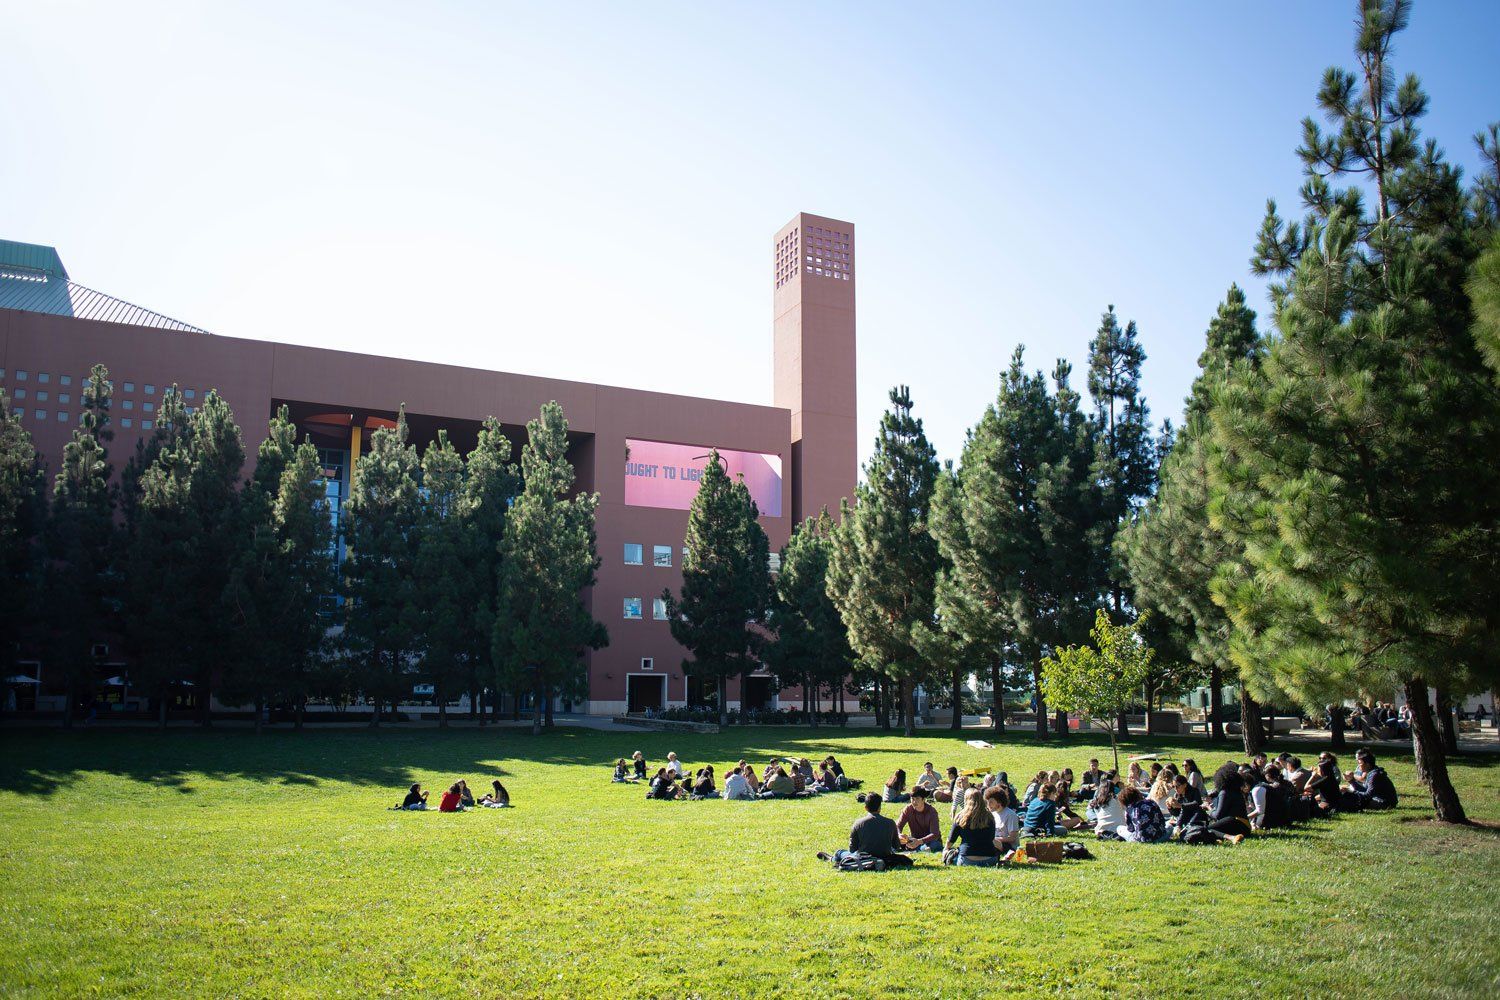 Students relaxing on lawn